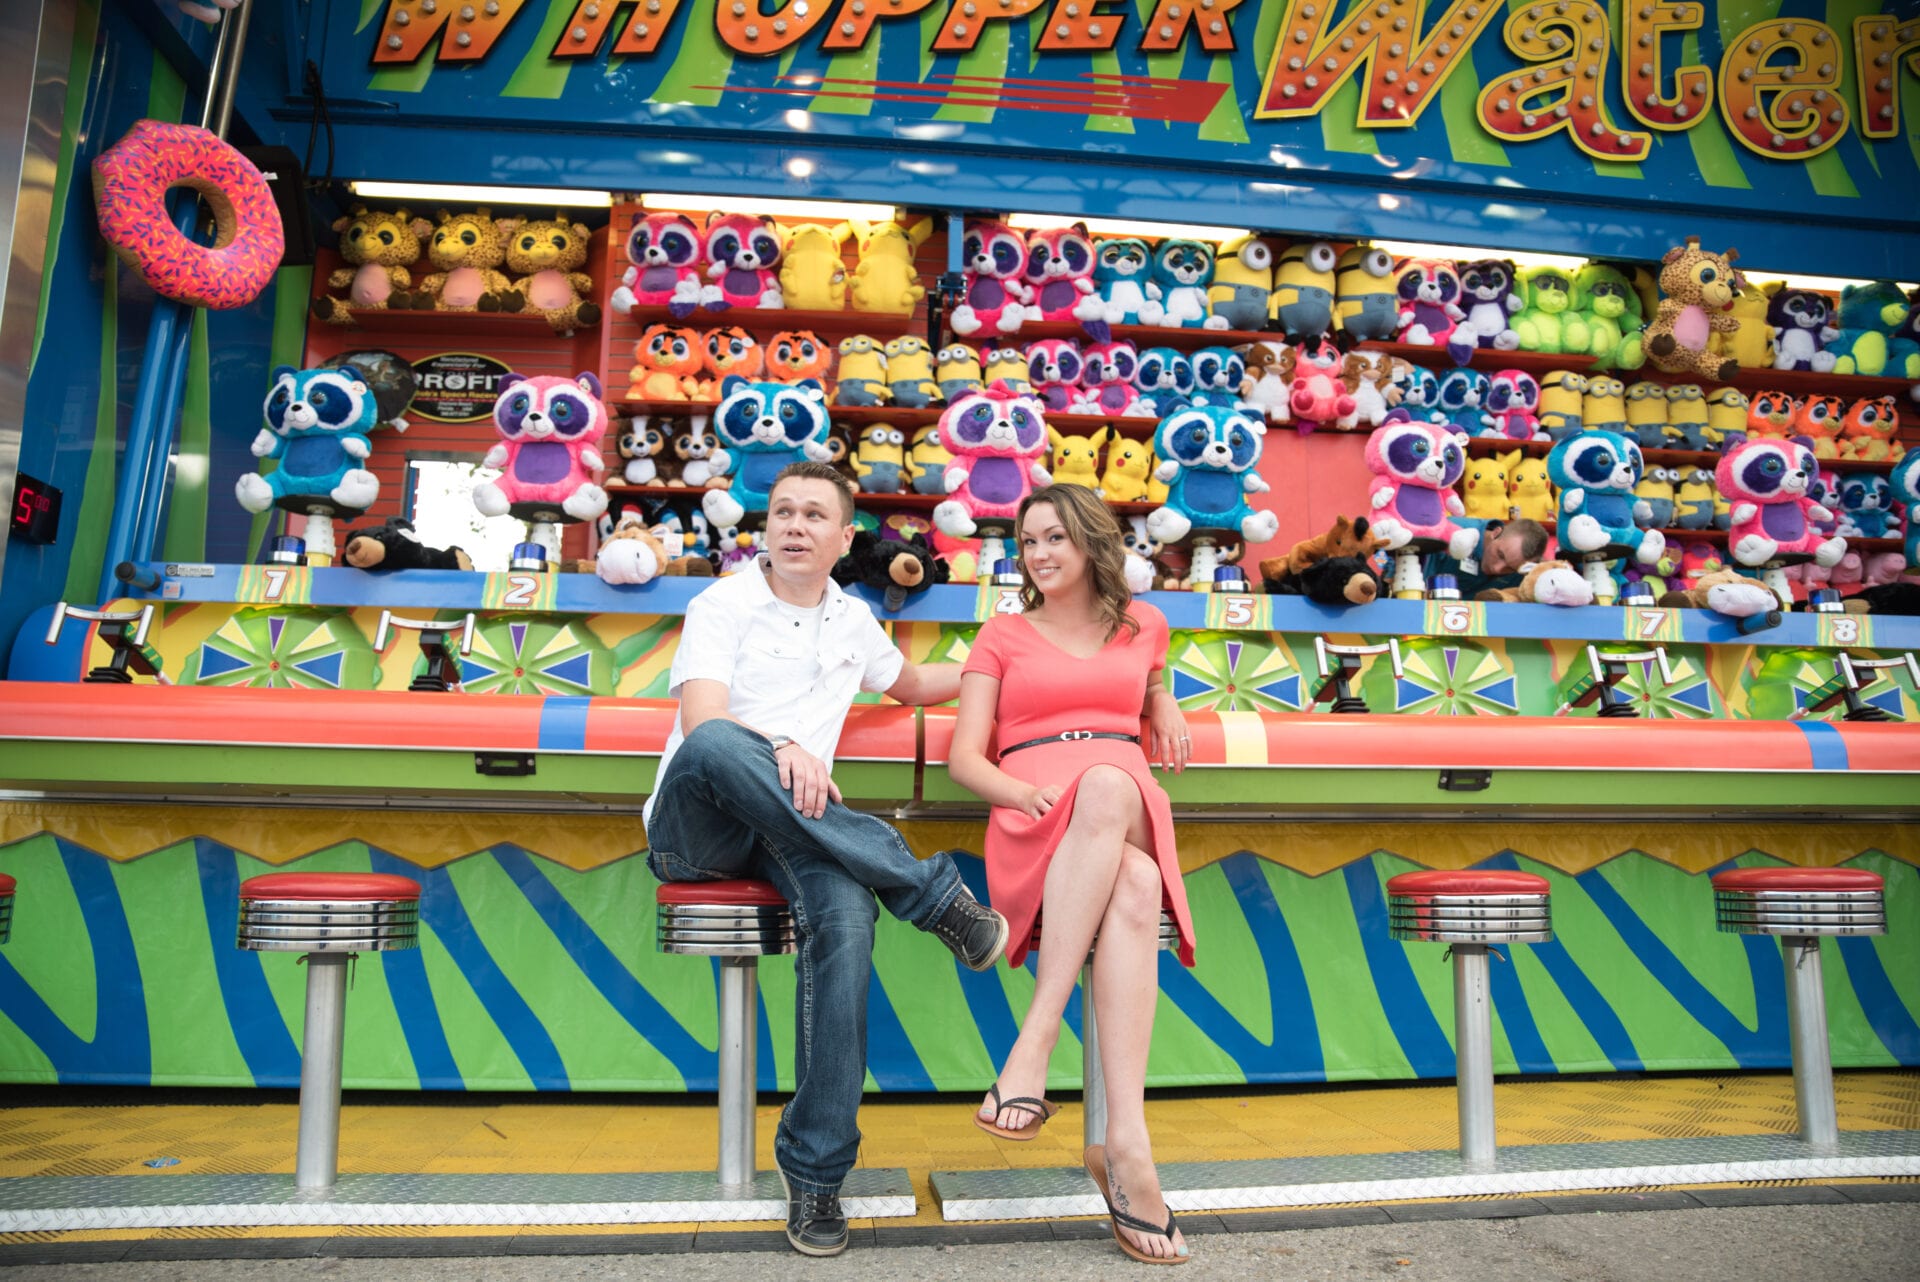 A couple sitting at a carnival game posing for a photo